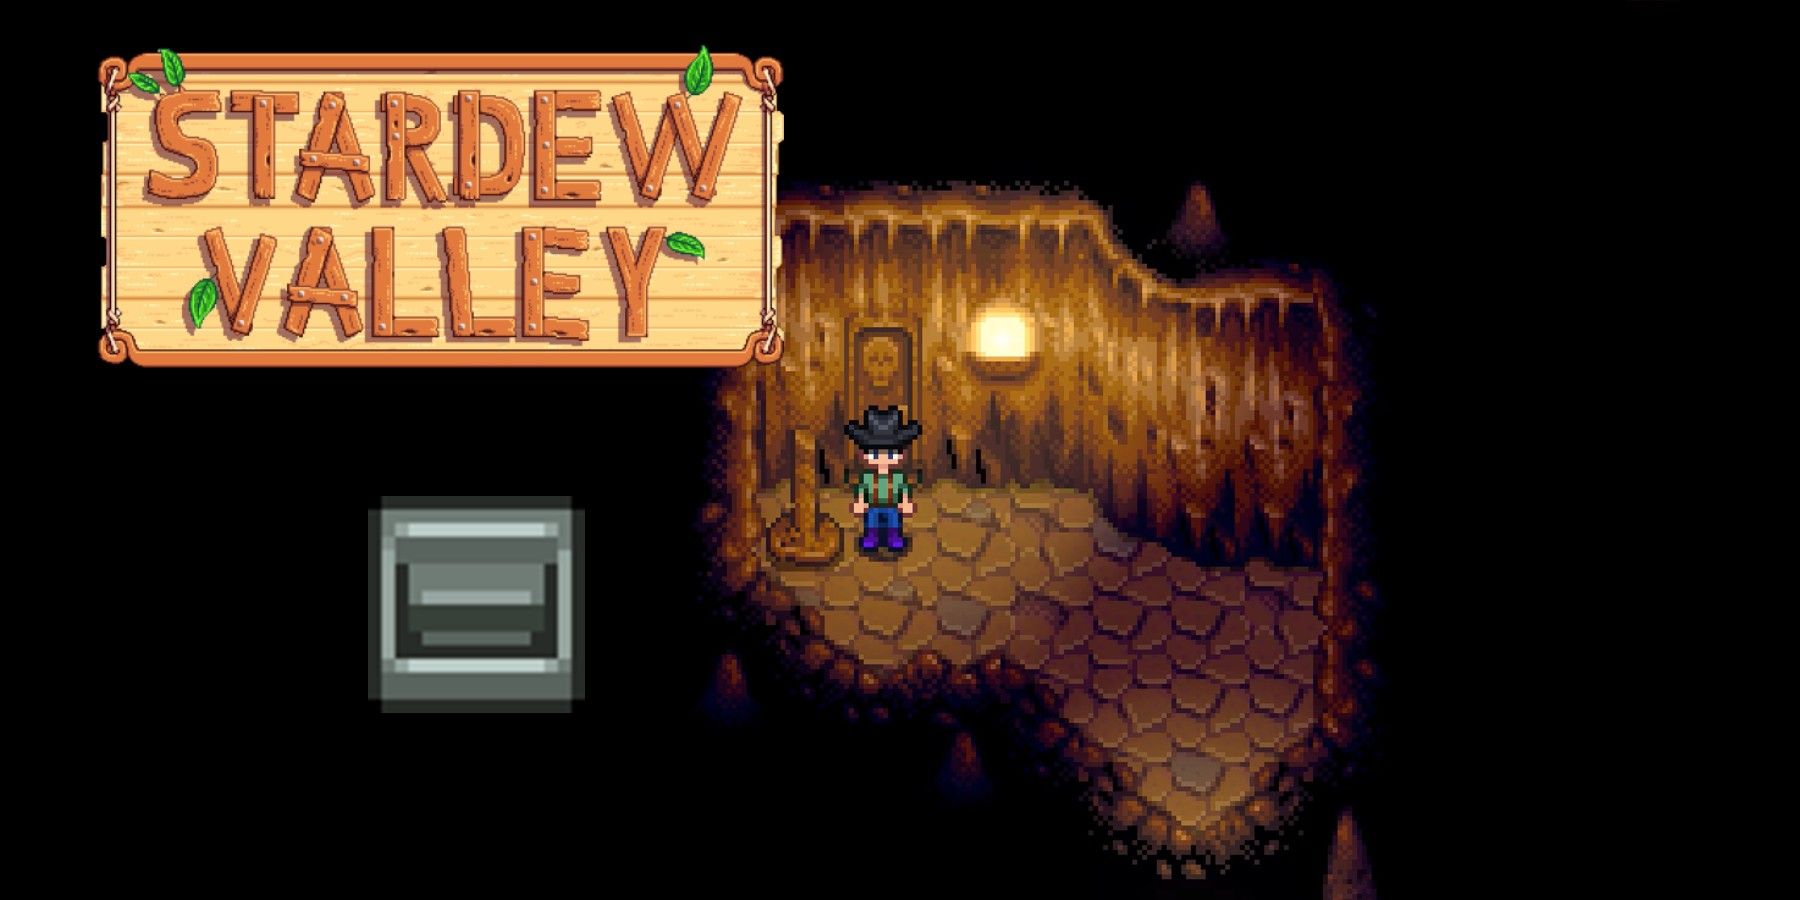 stardew valley staircase and logo